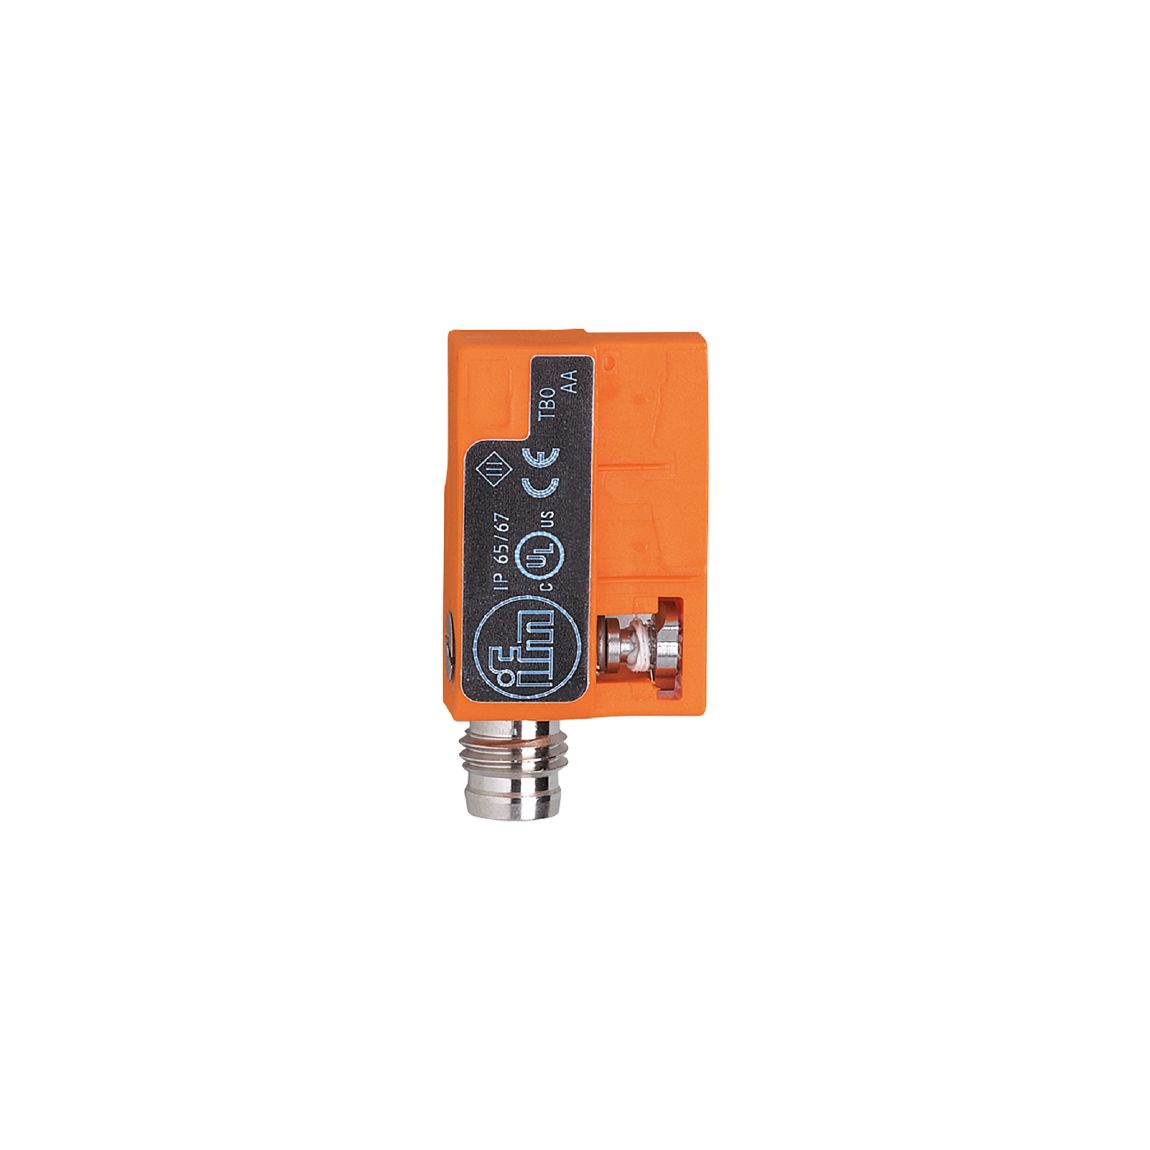 MR0902 - T-slot cylinder sensor with reed contact - ifm